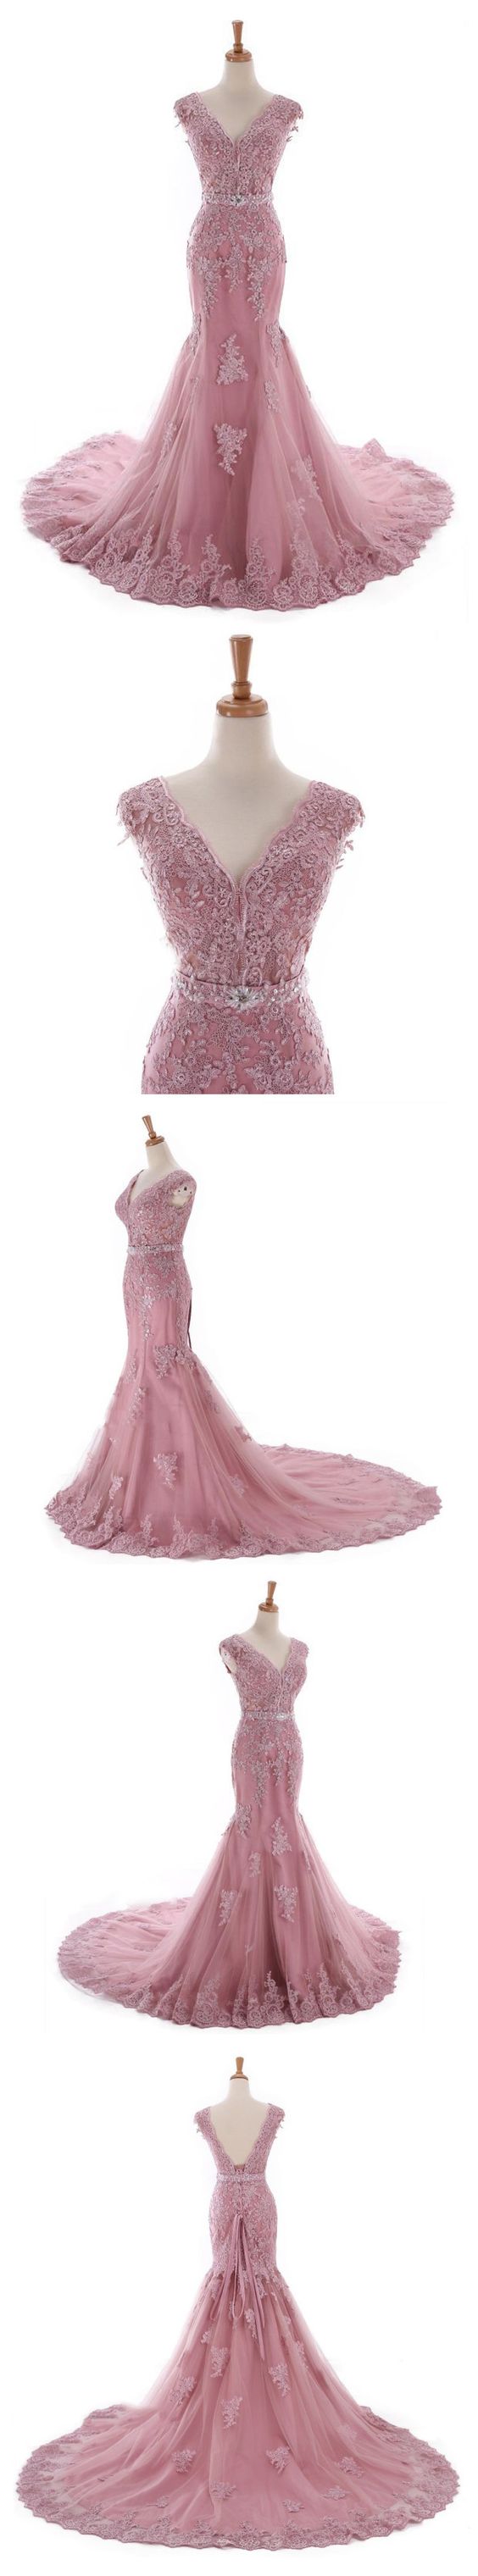 Simple Prom Dresses, Prom Gown,vintage Prom Gowns,elegant Evening Dress, Evening Gowns,party Gowns,pd14731